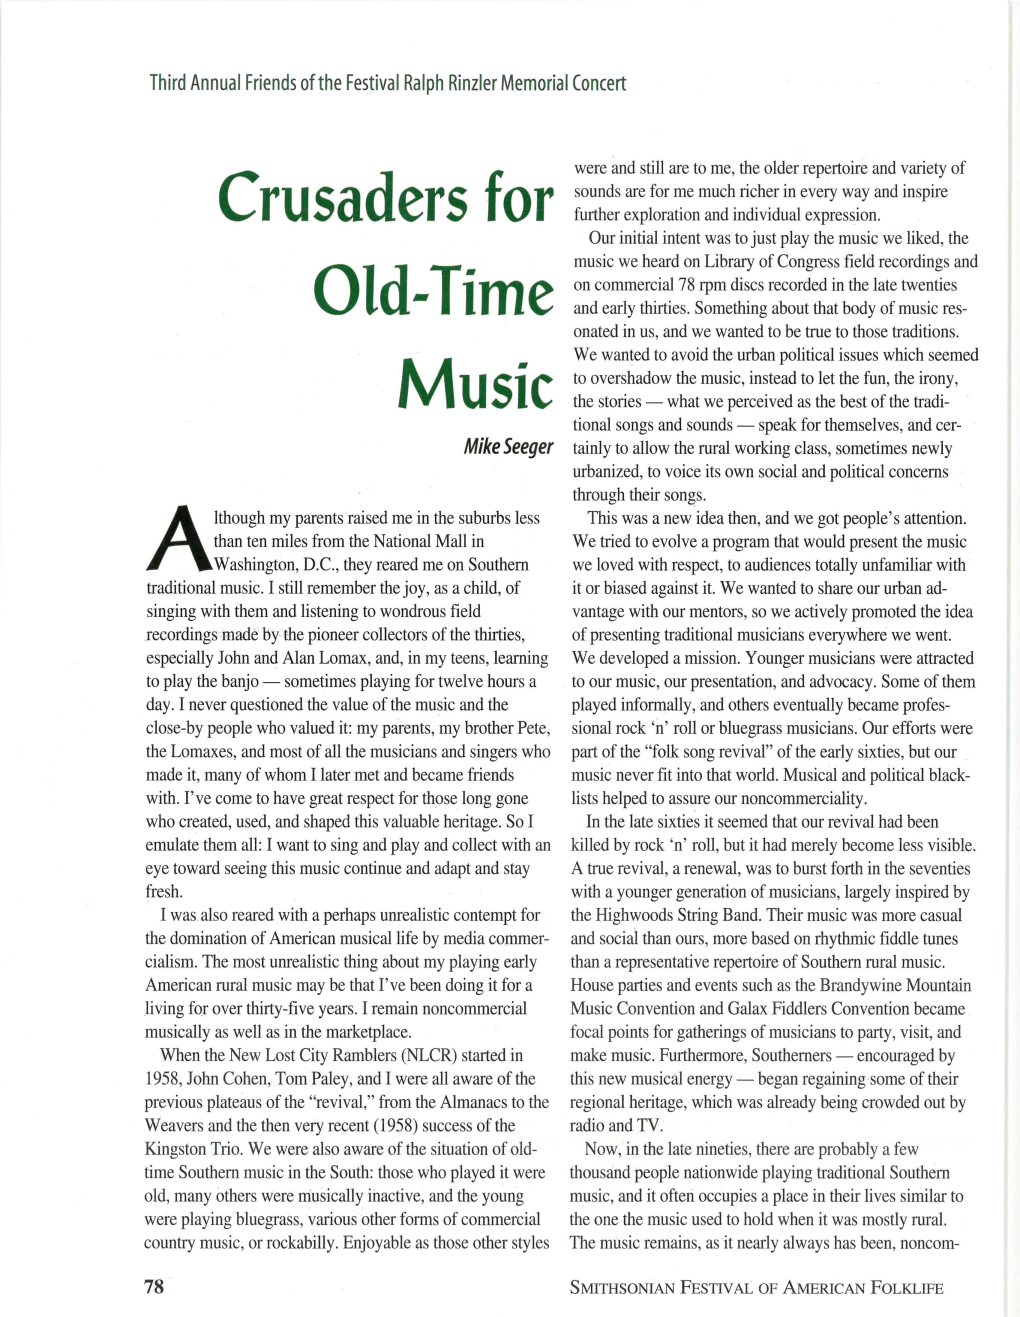 Crusaders for Old-Time Music